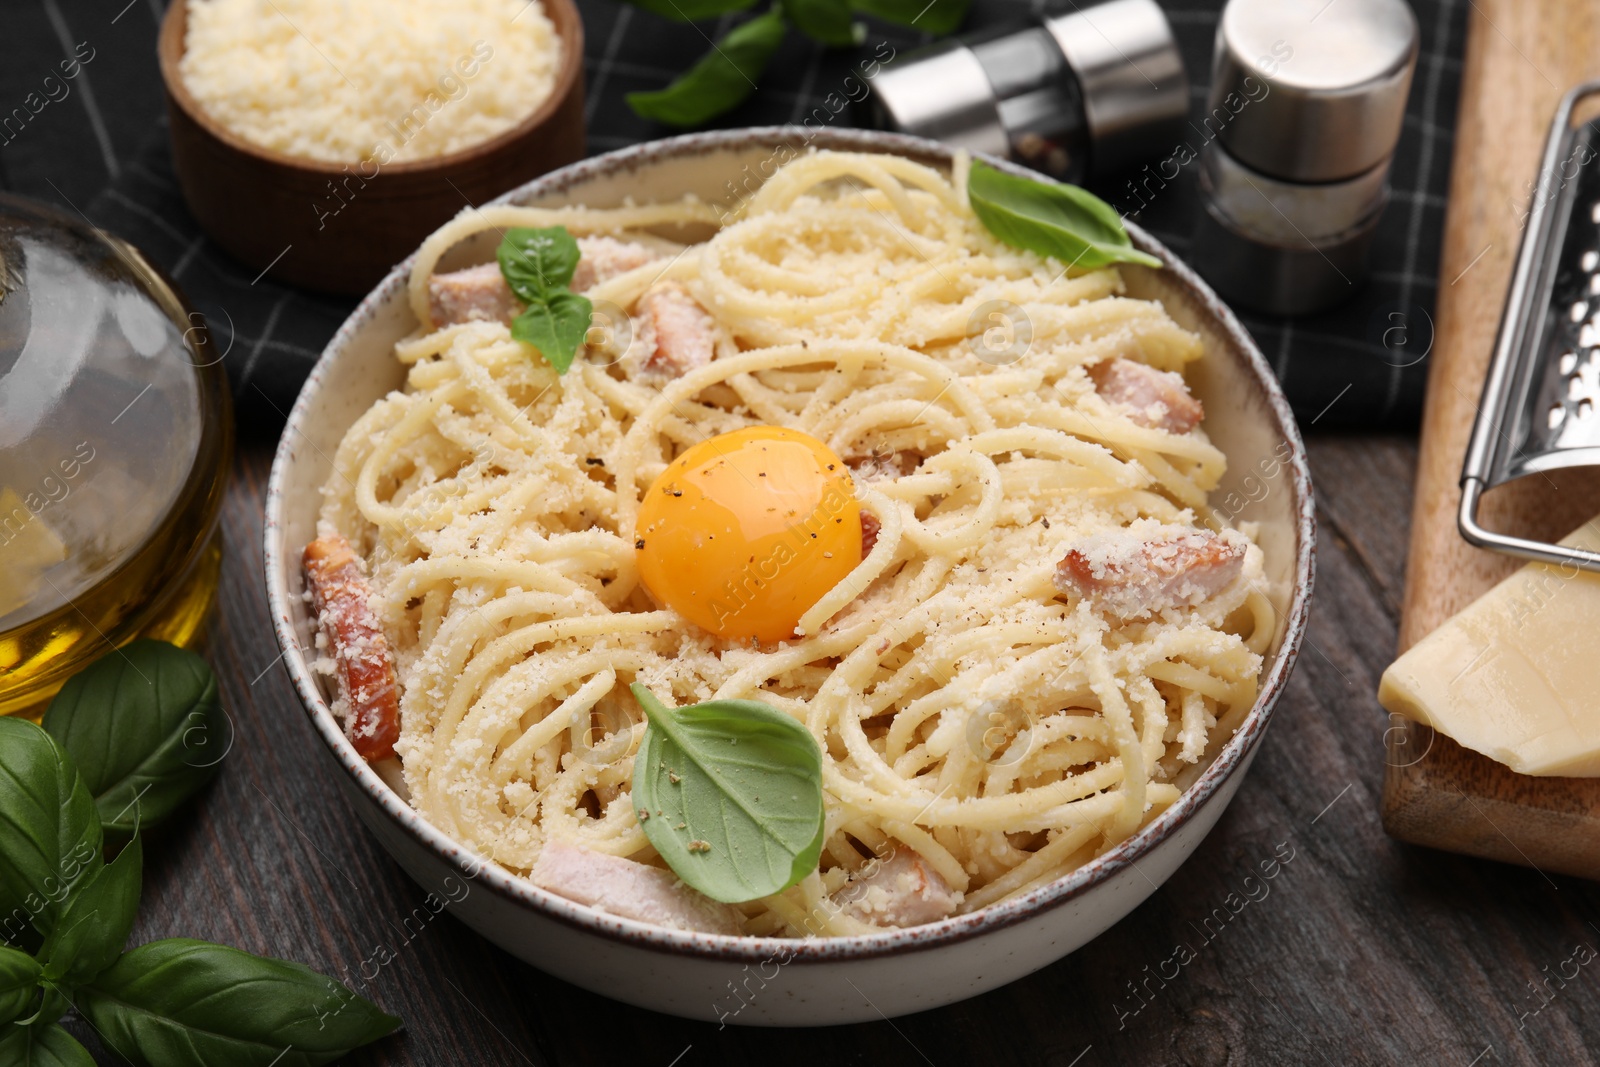 Photo of Bowl of tasty pasta Carbonara with basil leaves and egg yolk on wooden table